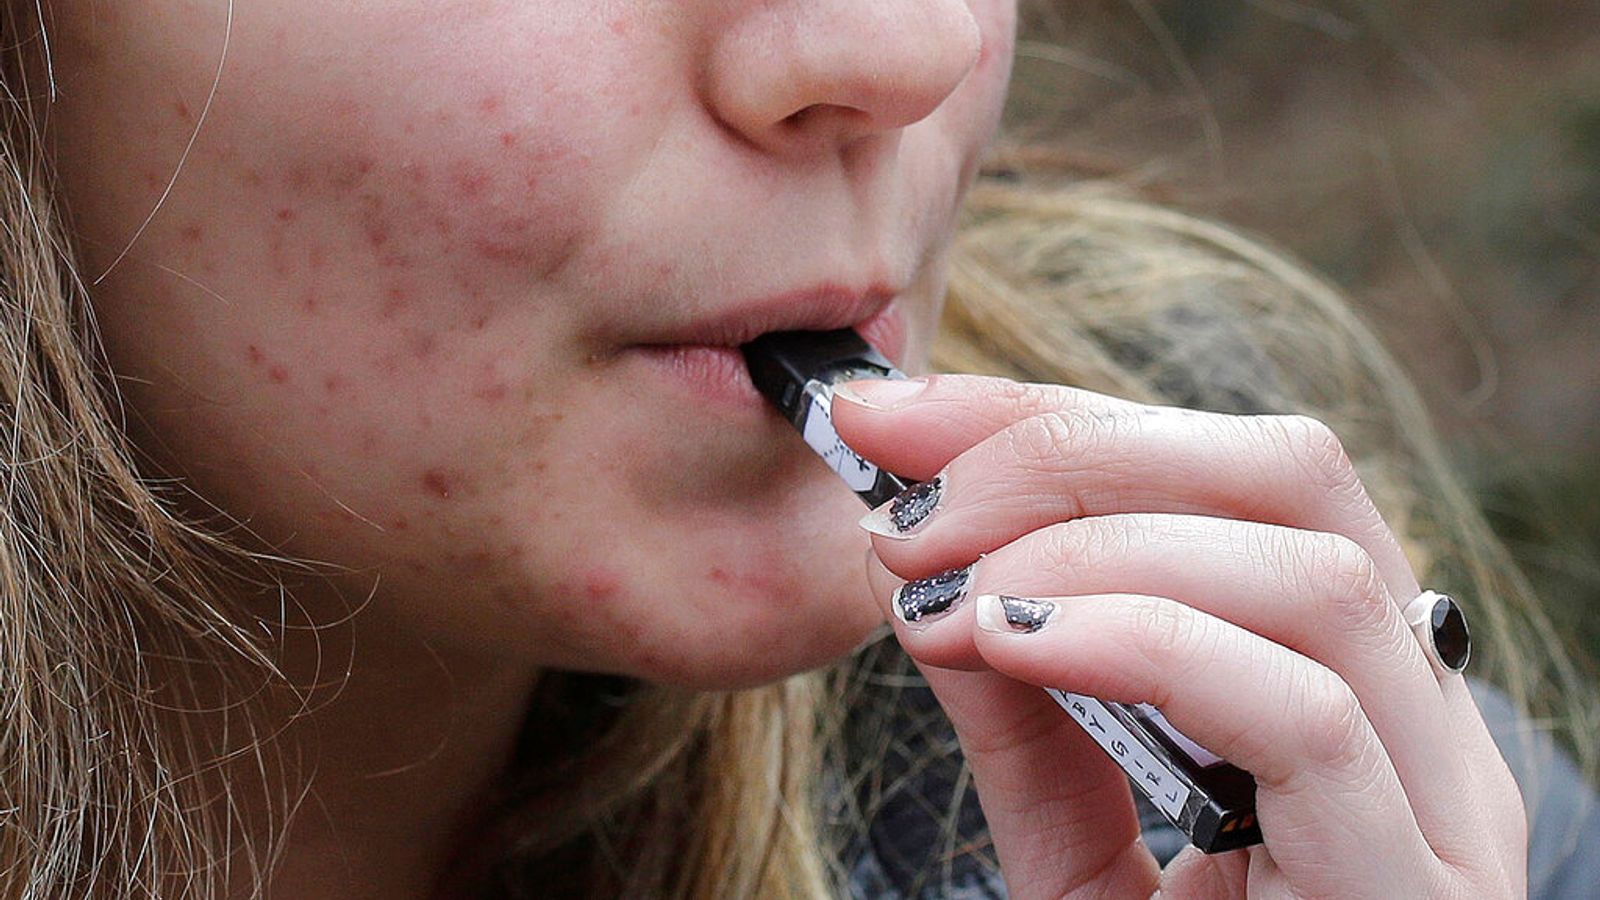 Vape advertising: Government to crack down on promotions 'targeted at children'